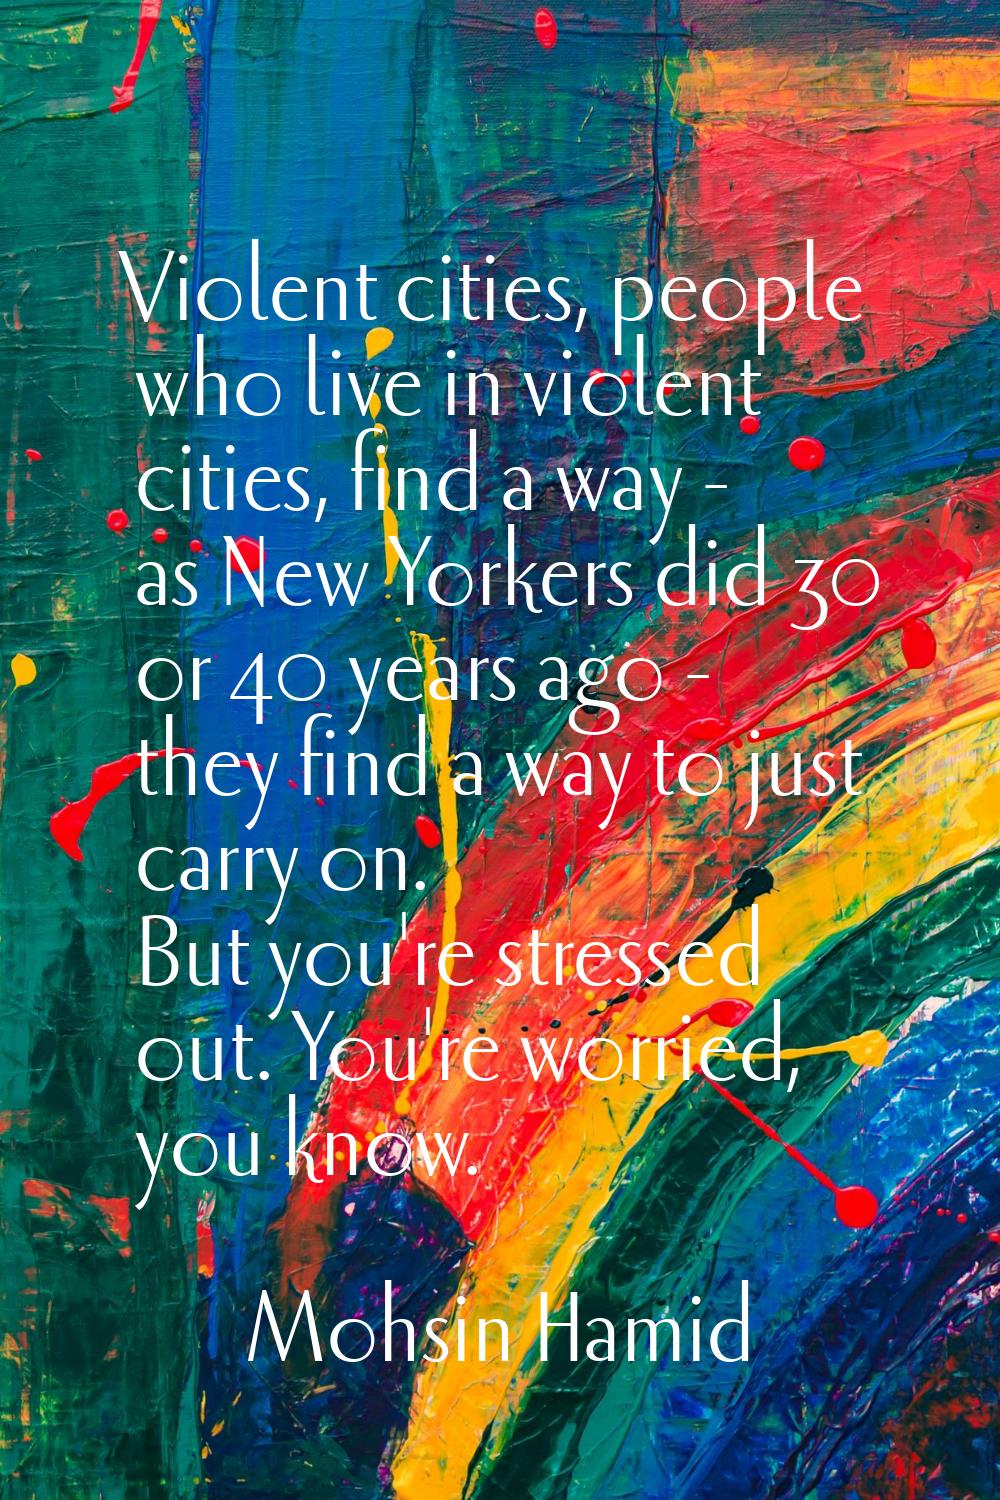 Violent cities, people who live in violent cities, find a way - as New Yorkers did 30 or 40 years a